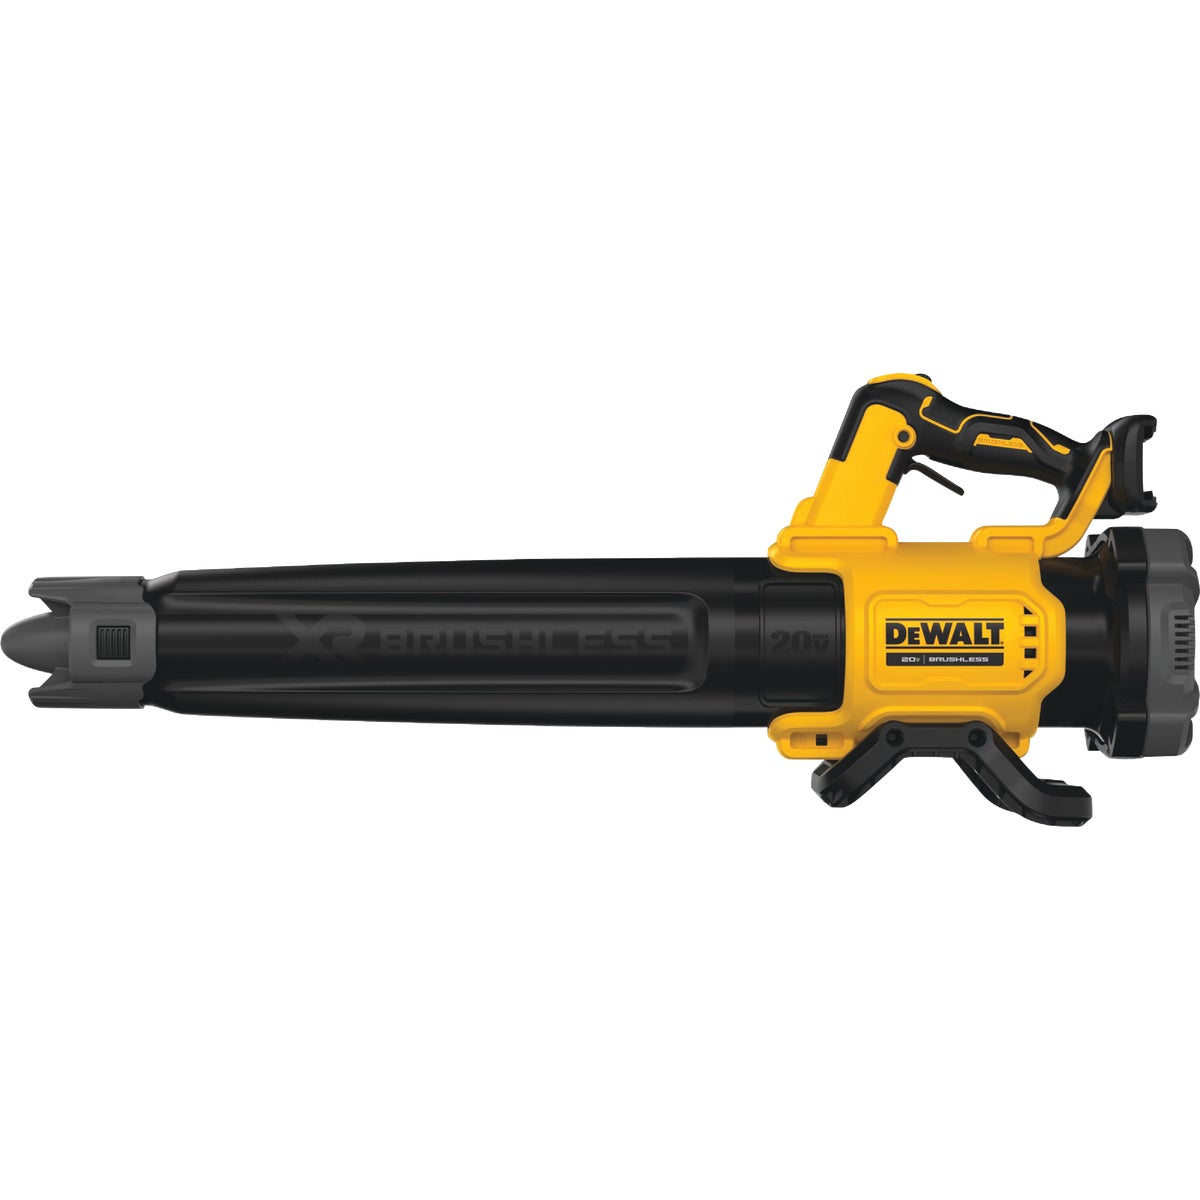 Item 705492, The DeWalt 20V MAX Brushless Handheld Blower provides the ability to clear 